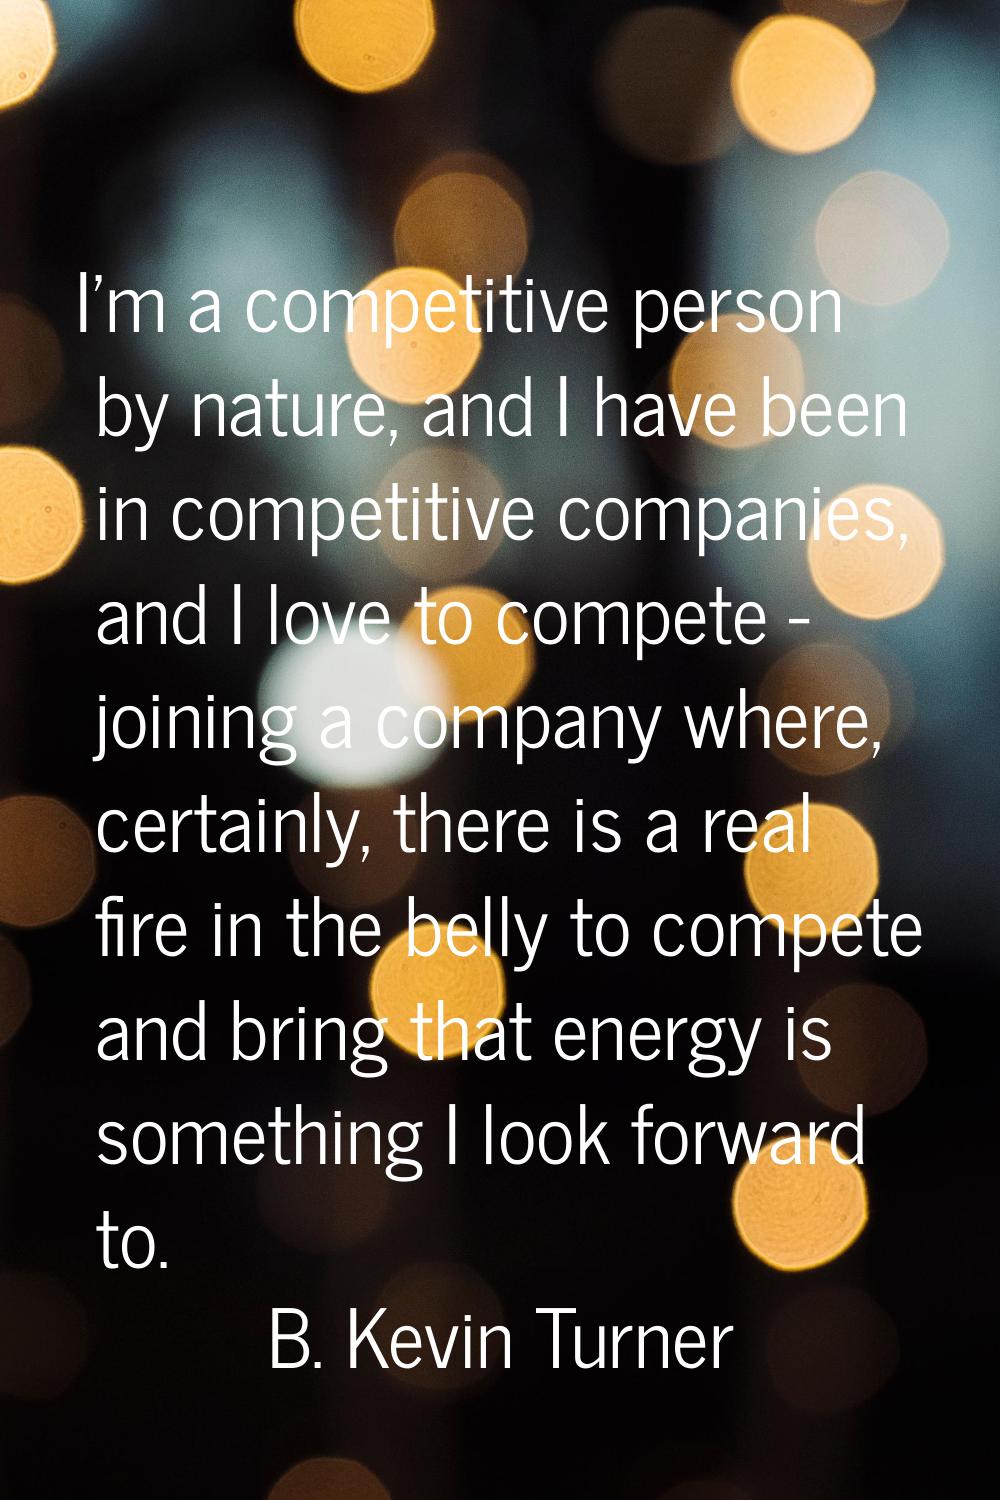 I'm a competitive person by nature, and I have been in competitive companies, and I love to compete